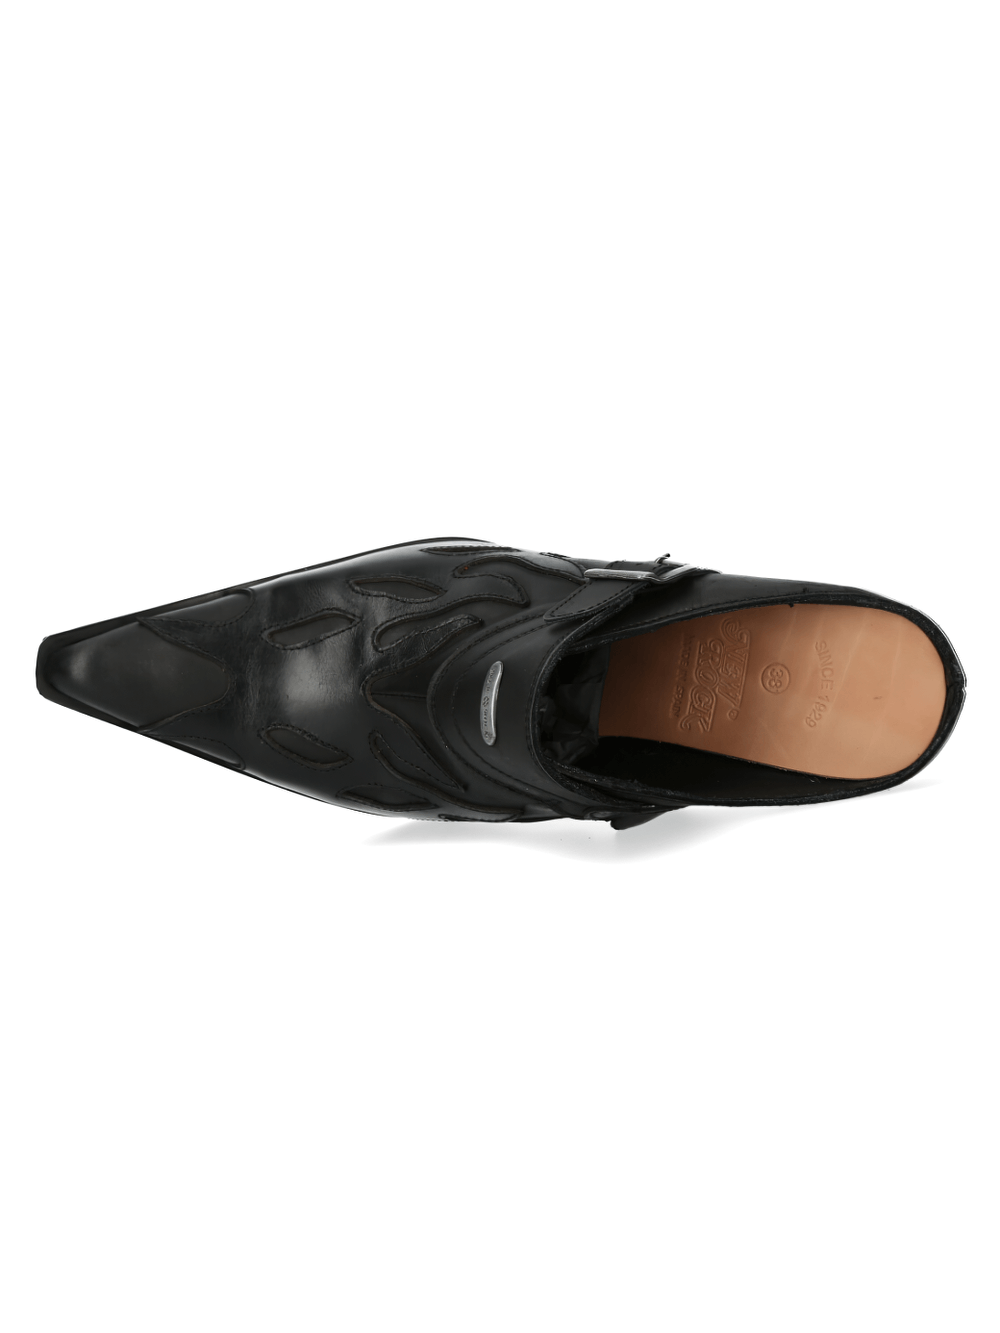 NEW ROCK Flame-Inspired Black Leather Buckle Shoes